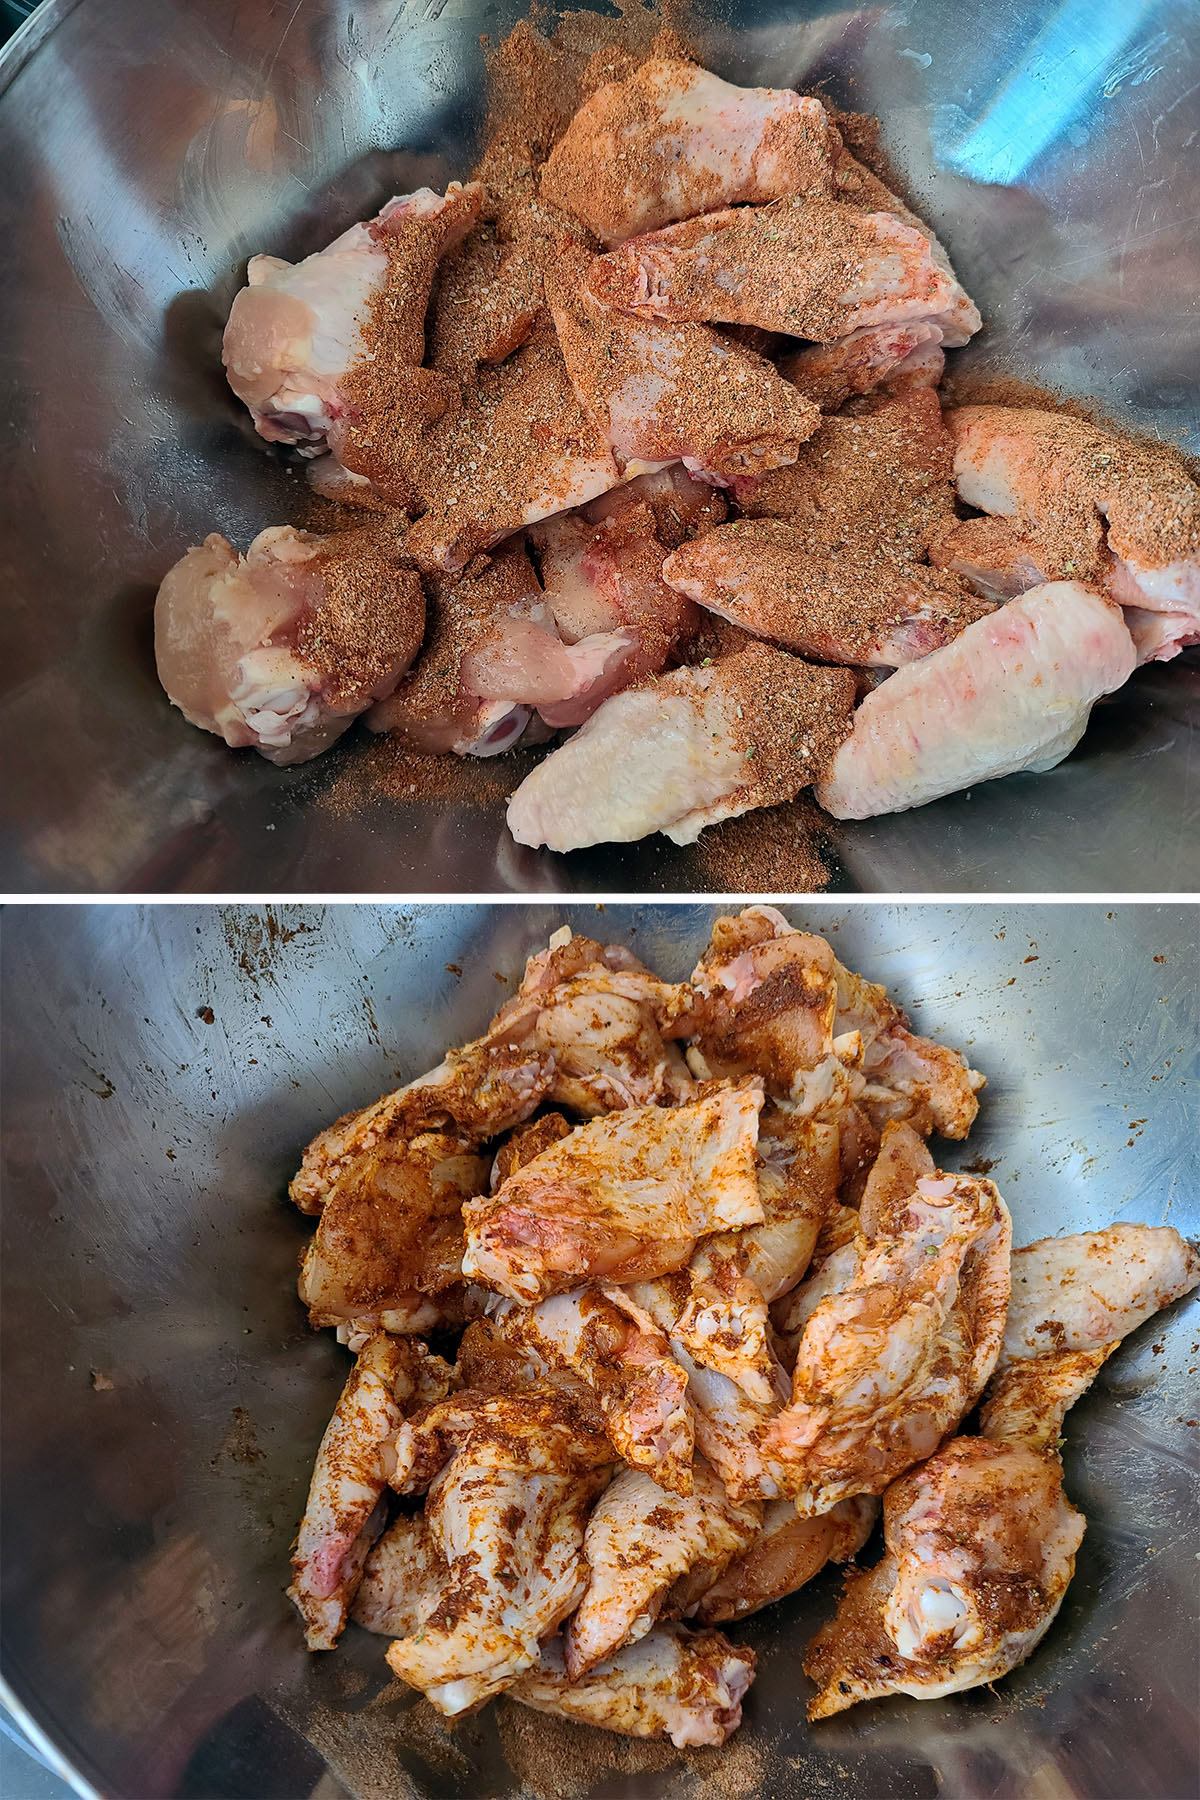 A bowl of raw chicken wings, before and after being coated in rub.